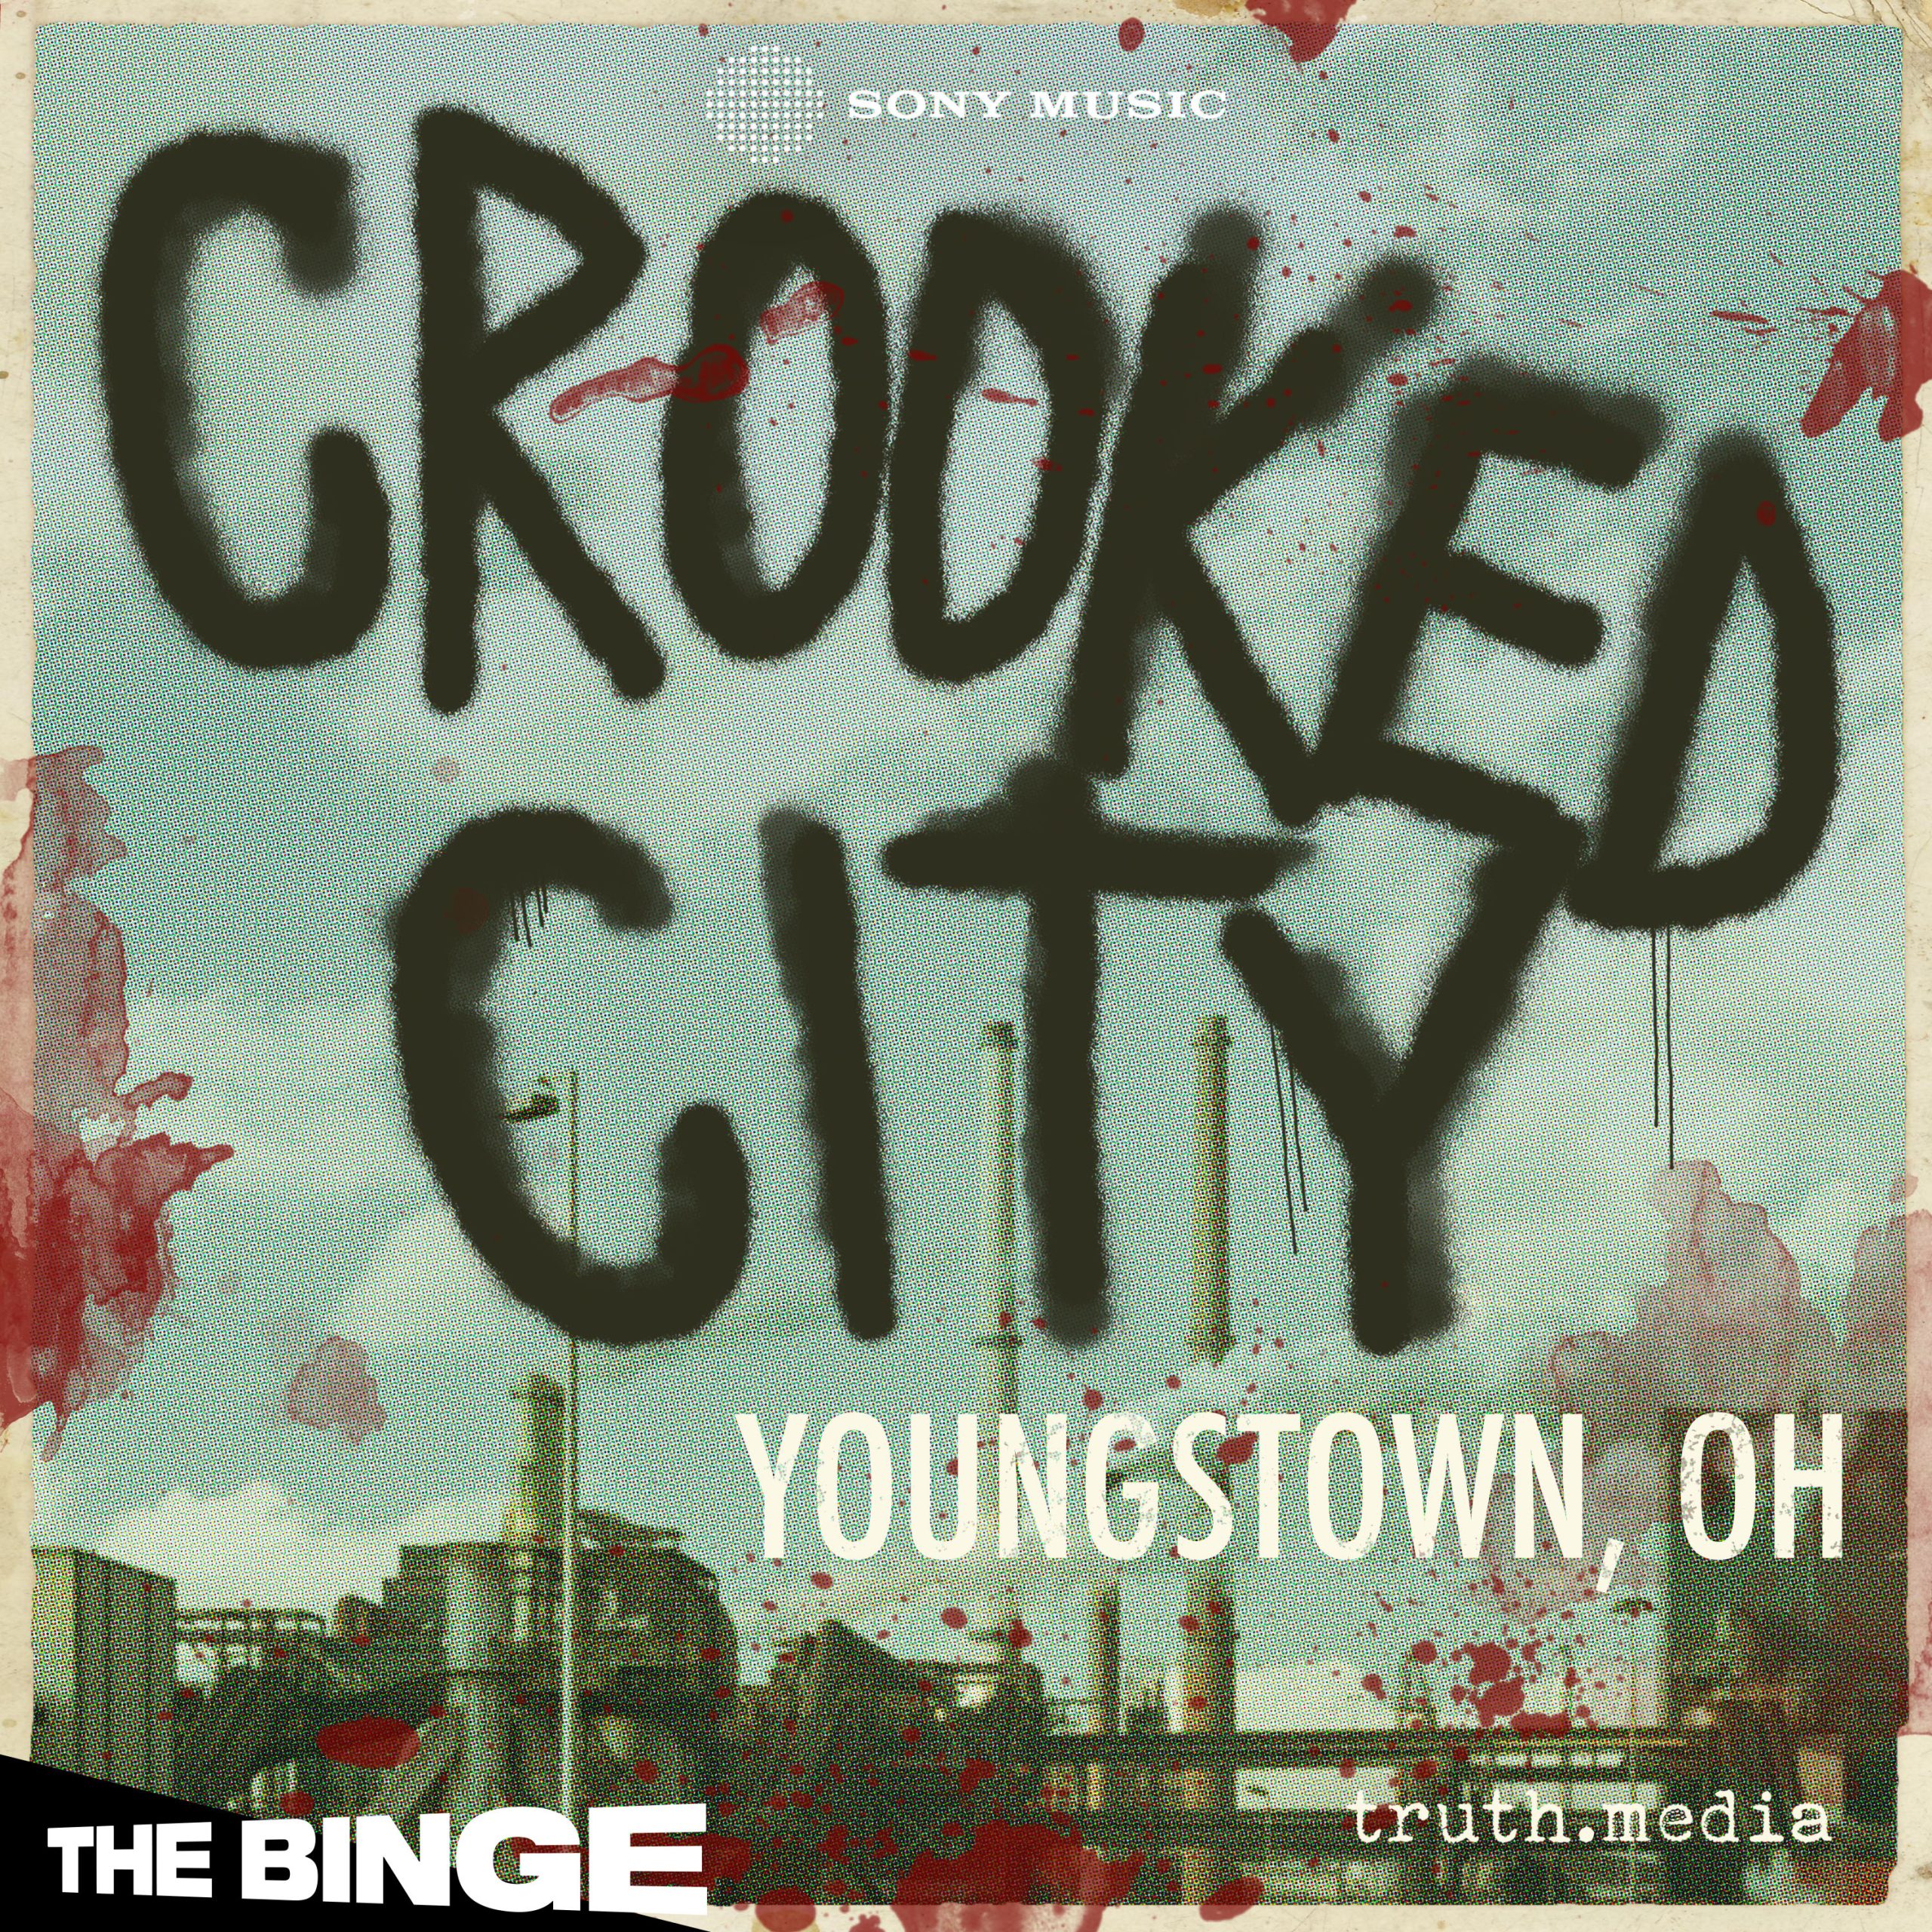 CrookedCity_Youngstown_r1 (1)